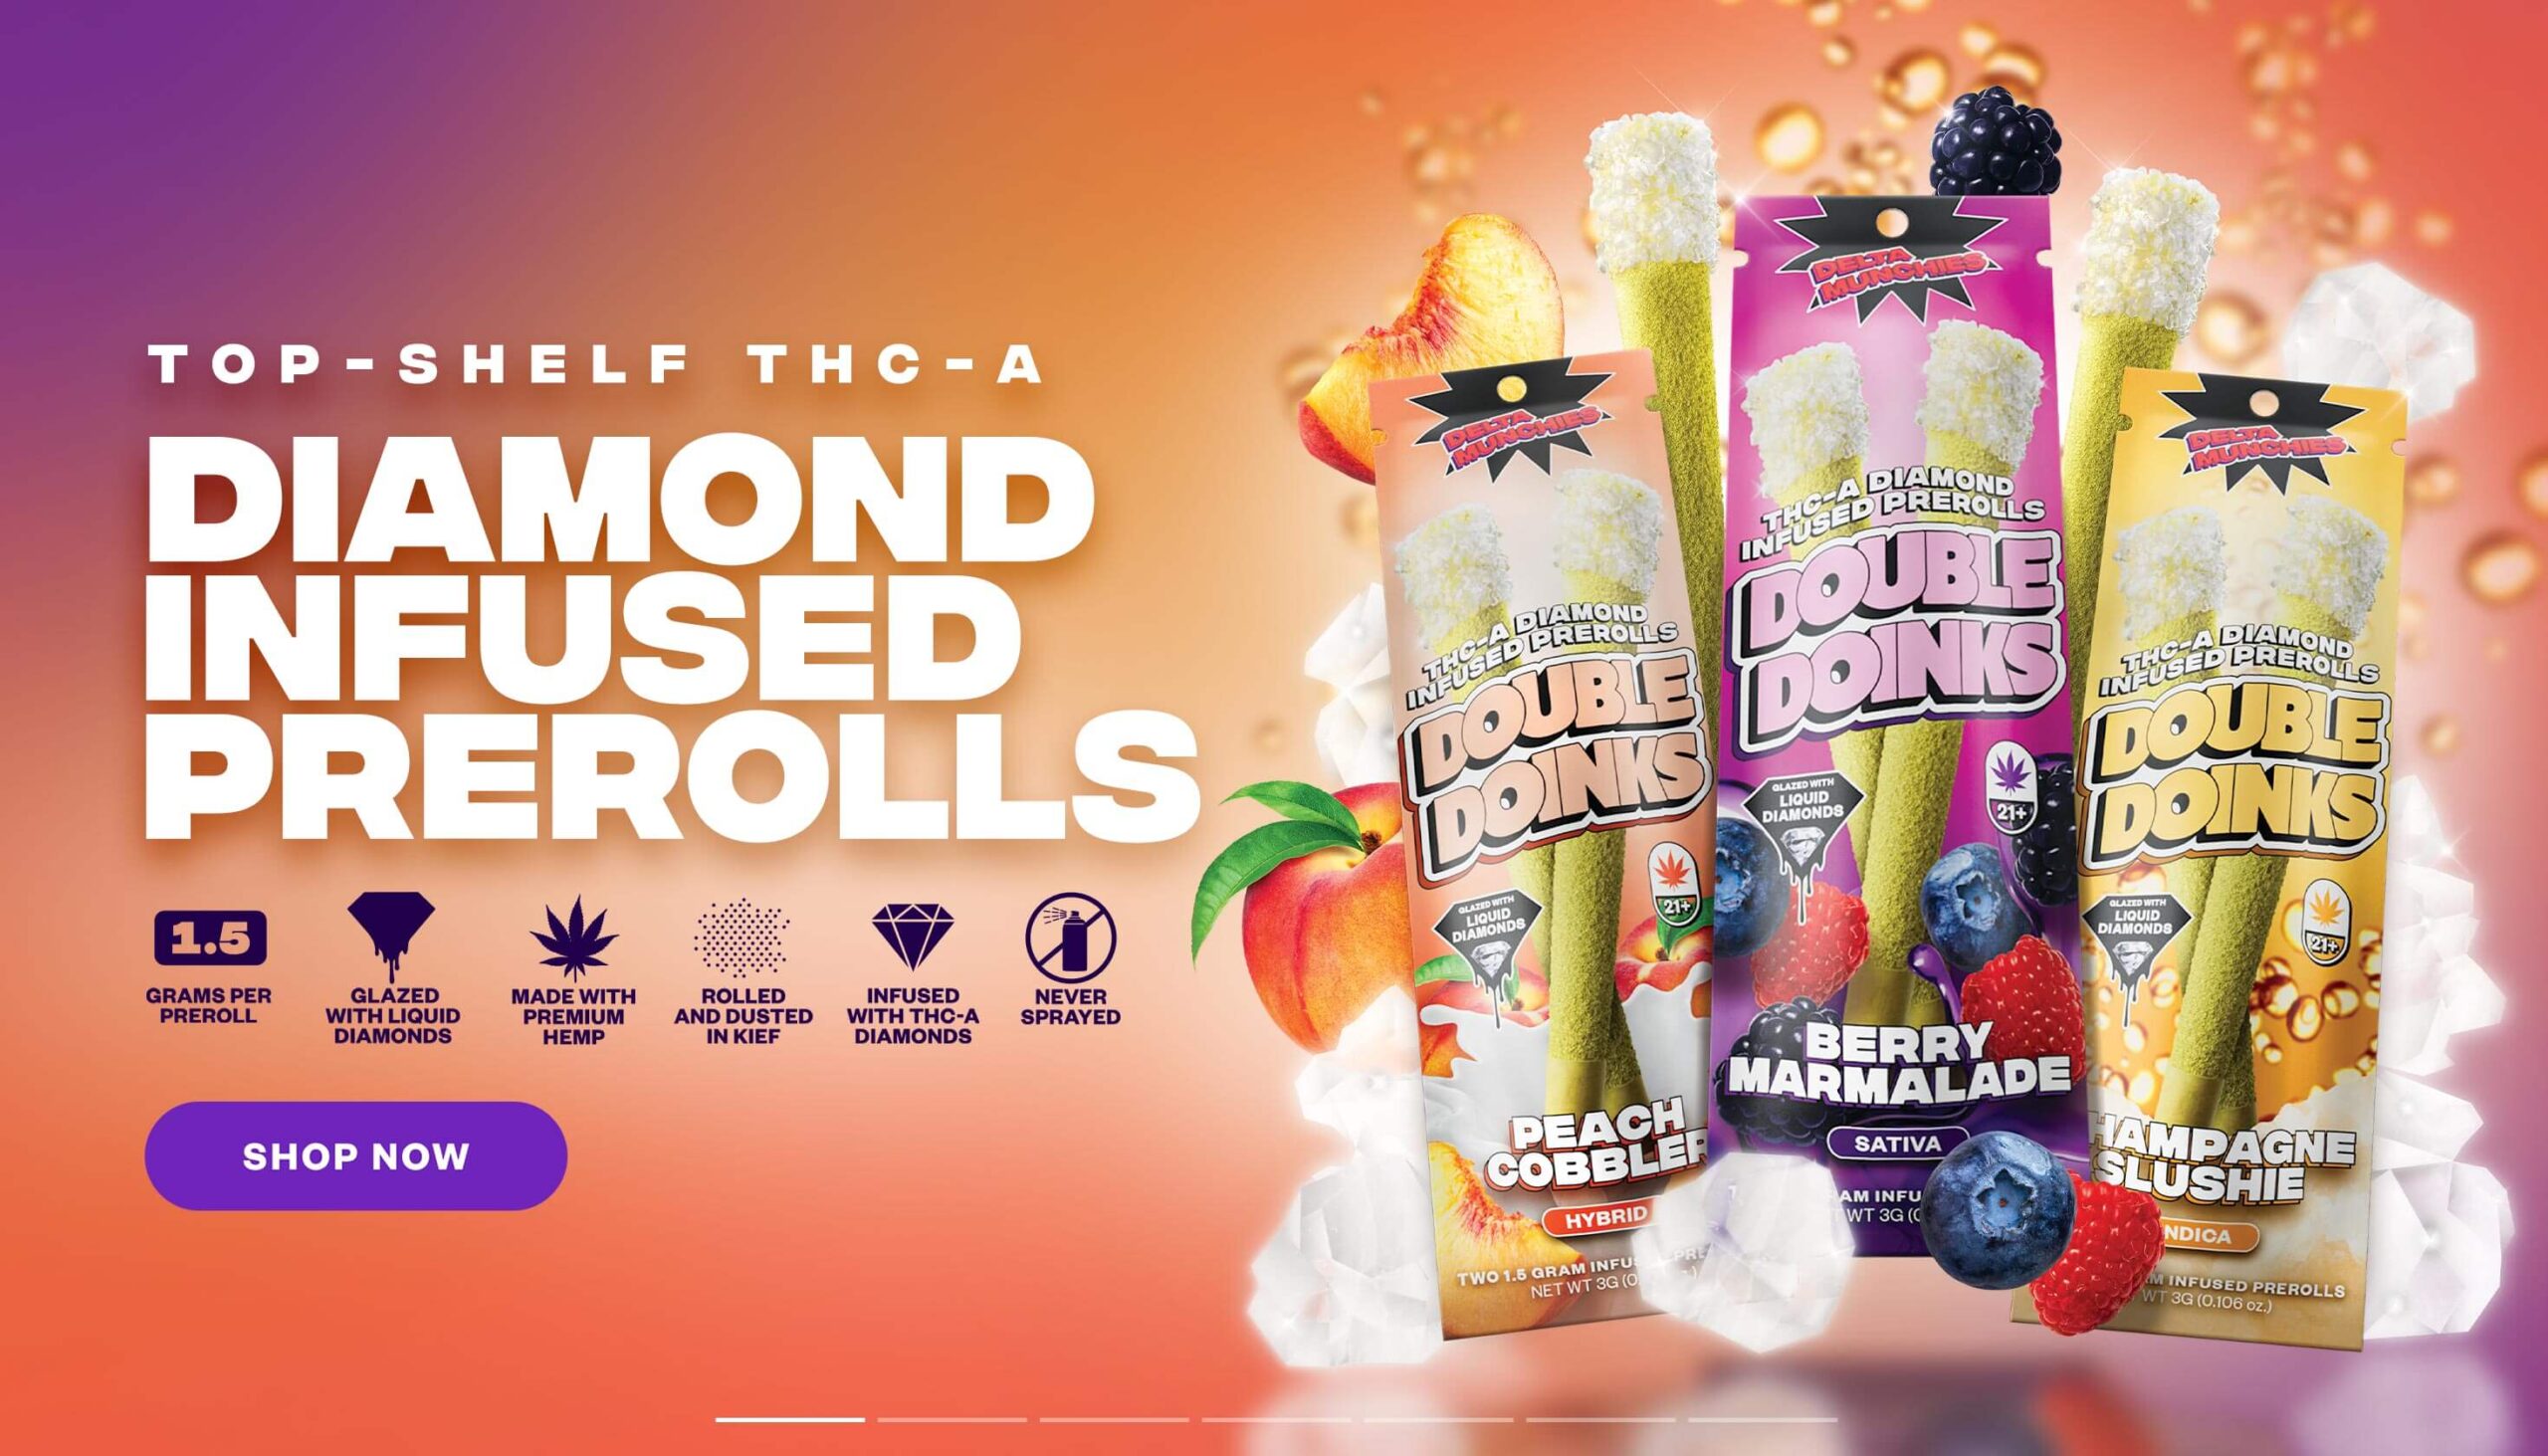 Delta Munchies THC-A Diamond Infused Prerolls. Glazed with liquid diamonds. Made with permium hemp. Rolled and dusted in kief. Infused with THC-A diamonds. Never Sprayed